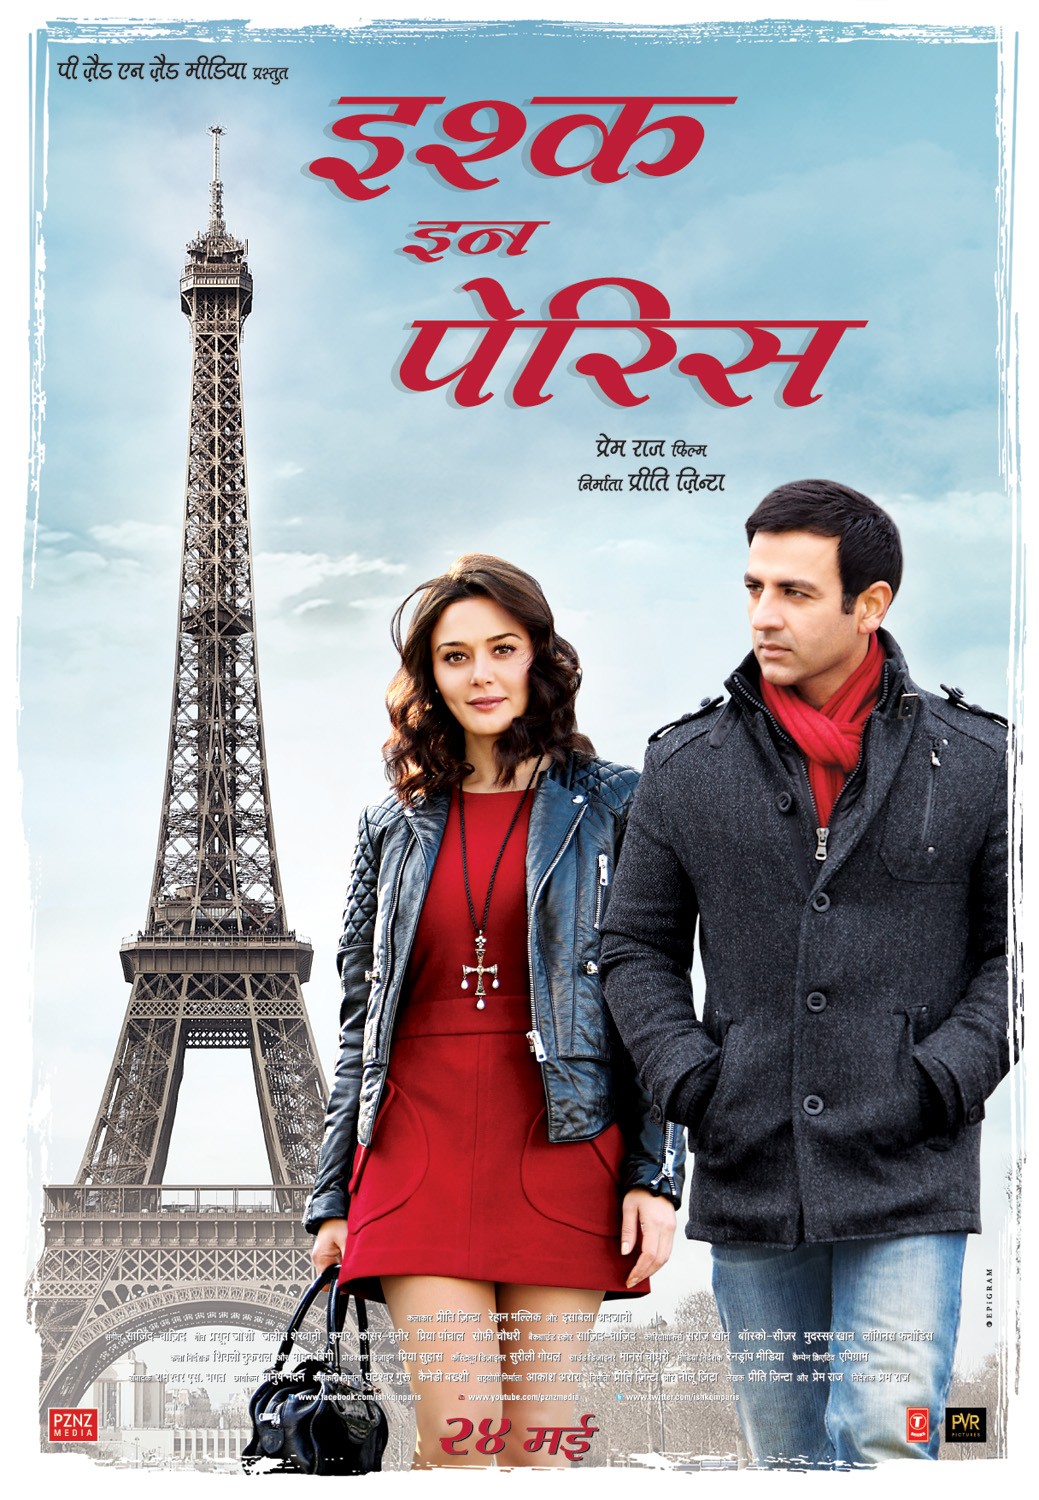 Extra Large Movie Poster Image for Ishkq in Paris (#3 of 4)